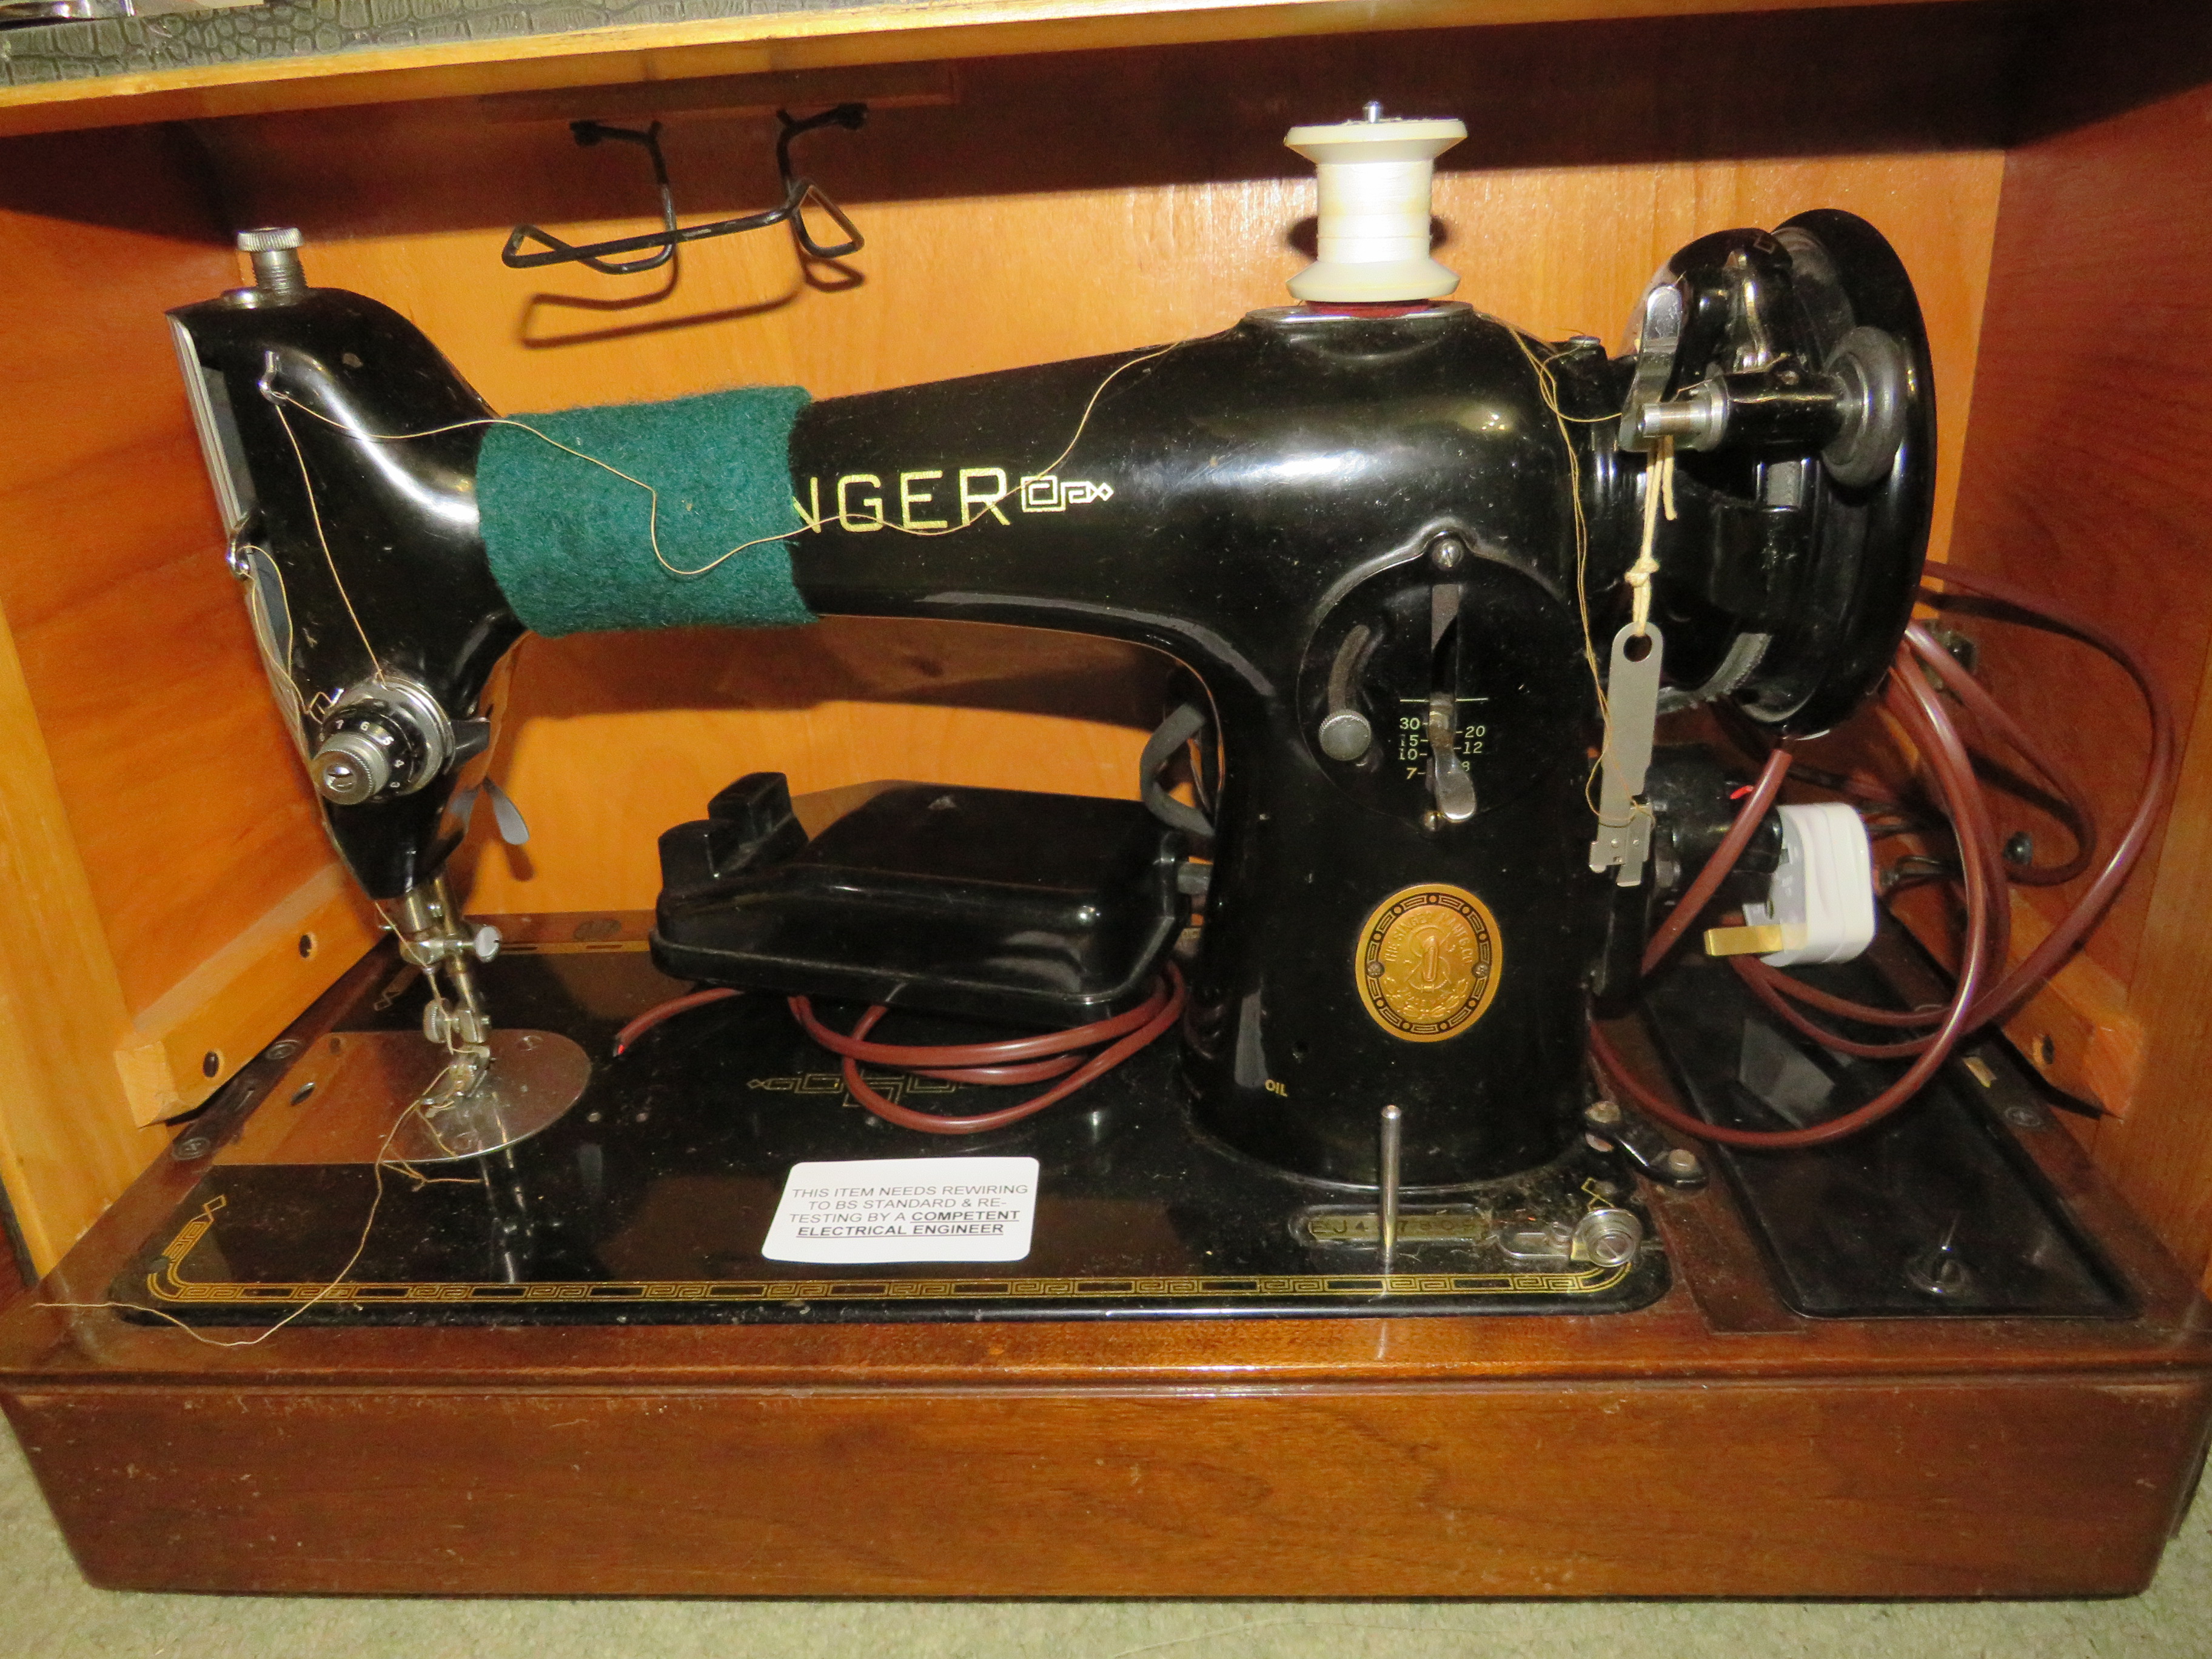 VINTAGE SINGER ELECTRIC SEWING MACHINE IN CASE - Image 2 of 3